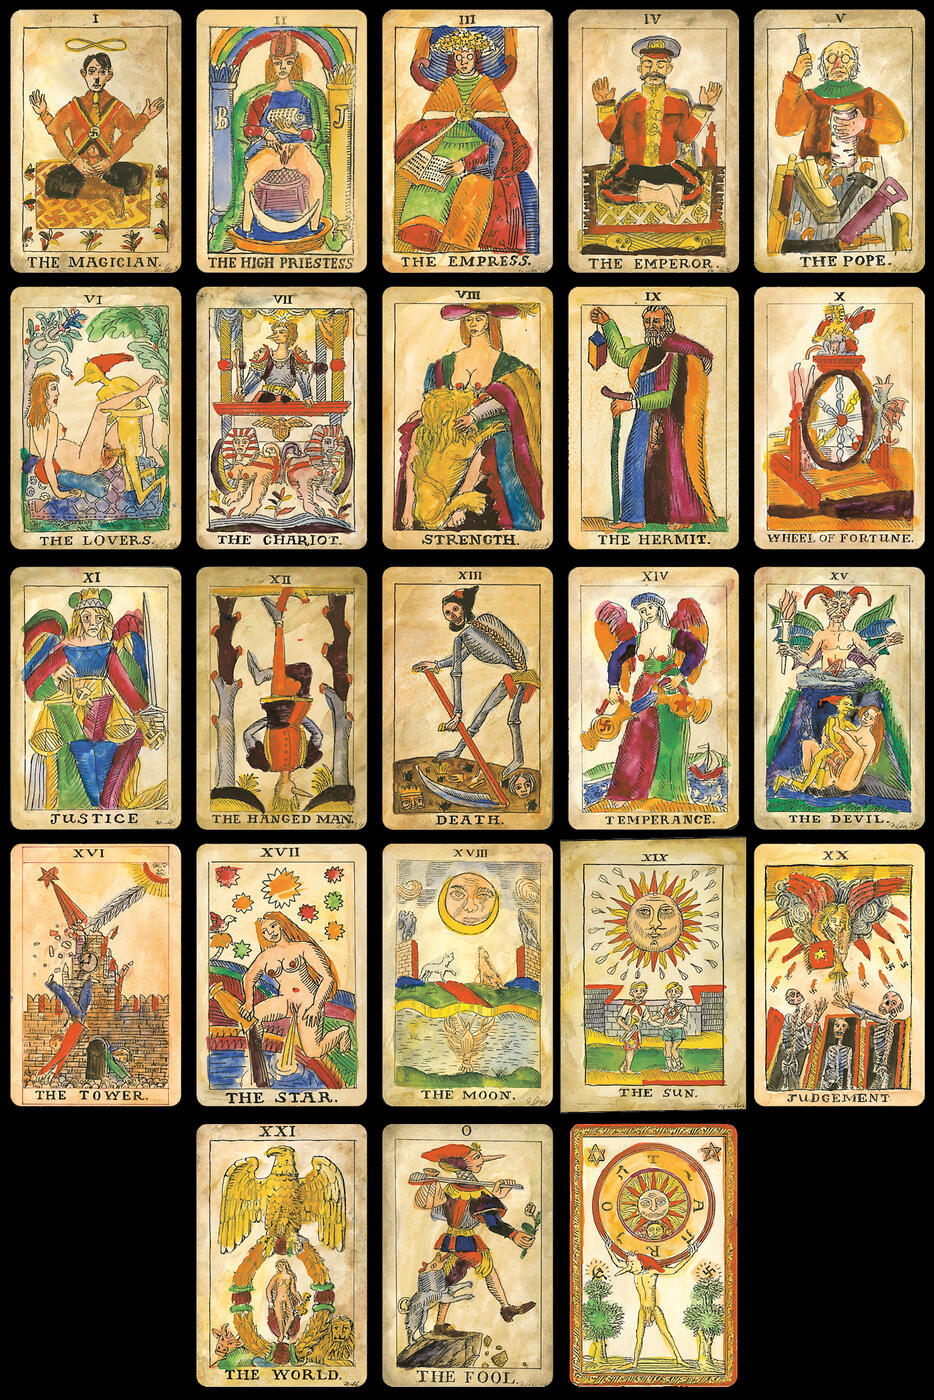 Esotericum. Makarevich Tarot, a collection of 23 cards and a cover sheet